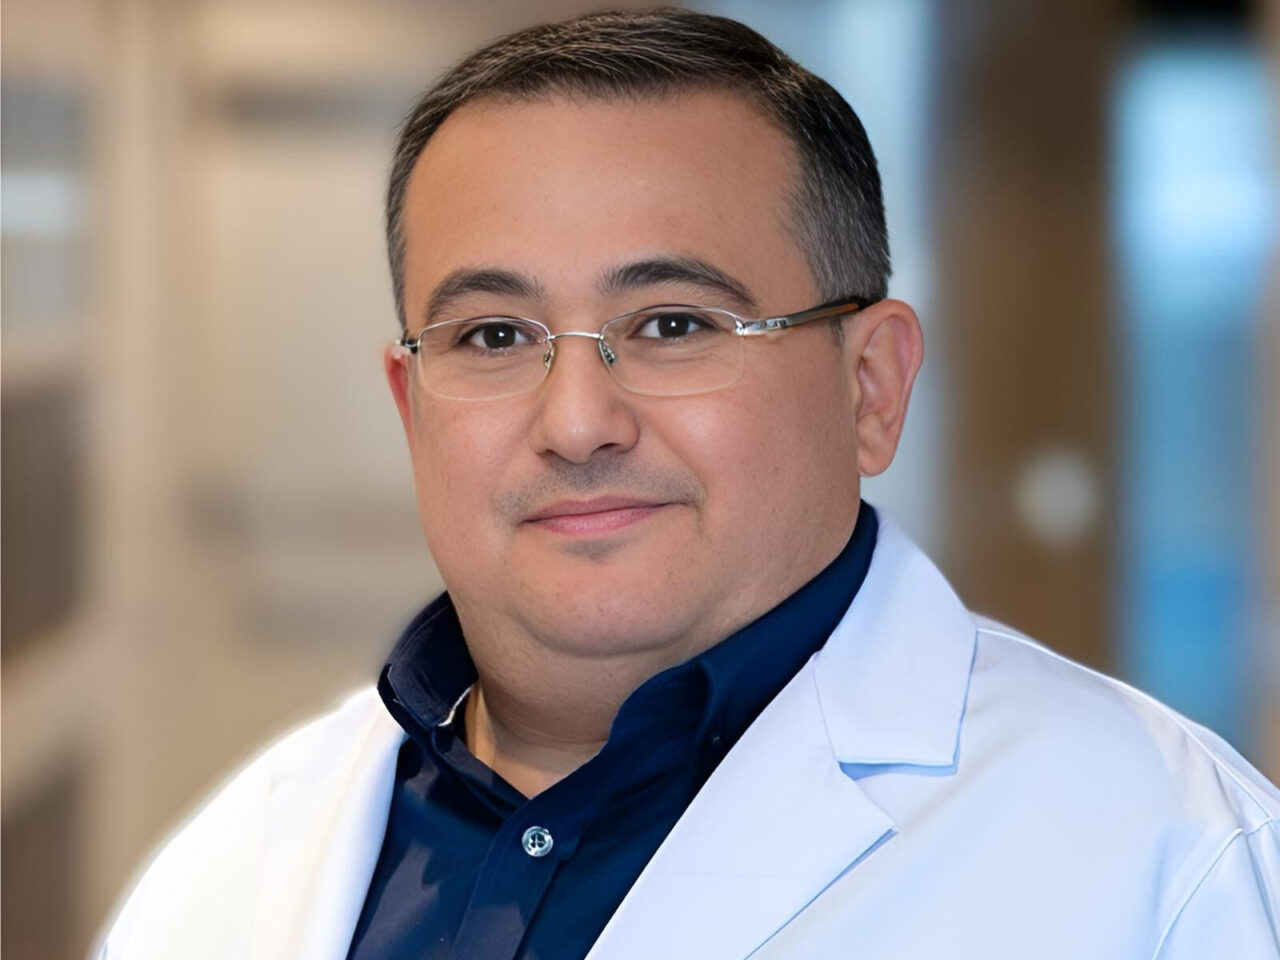 Mutlu Demiray: Discover how vMTBs are shaping the future of cancer care